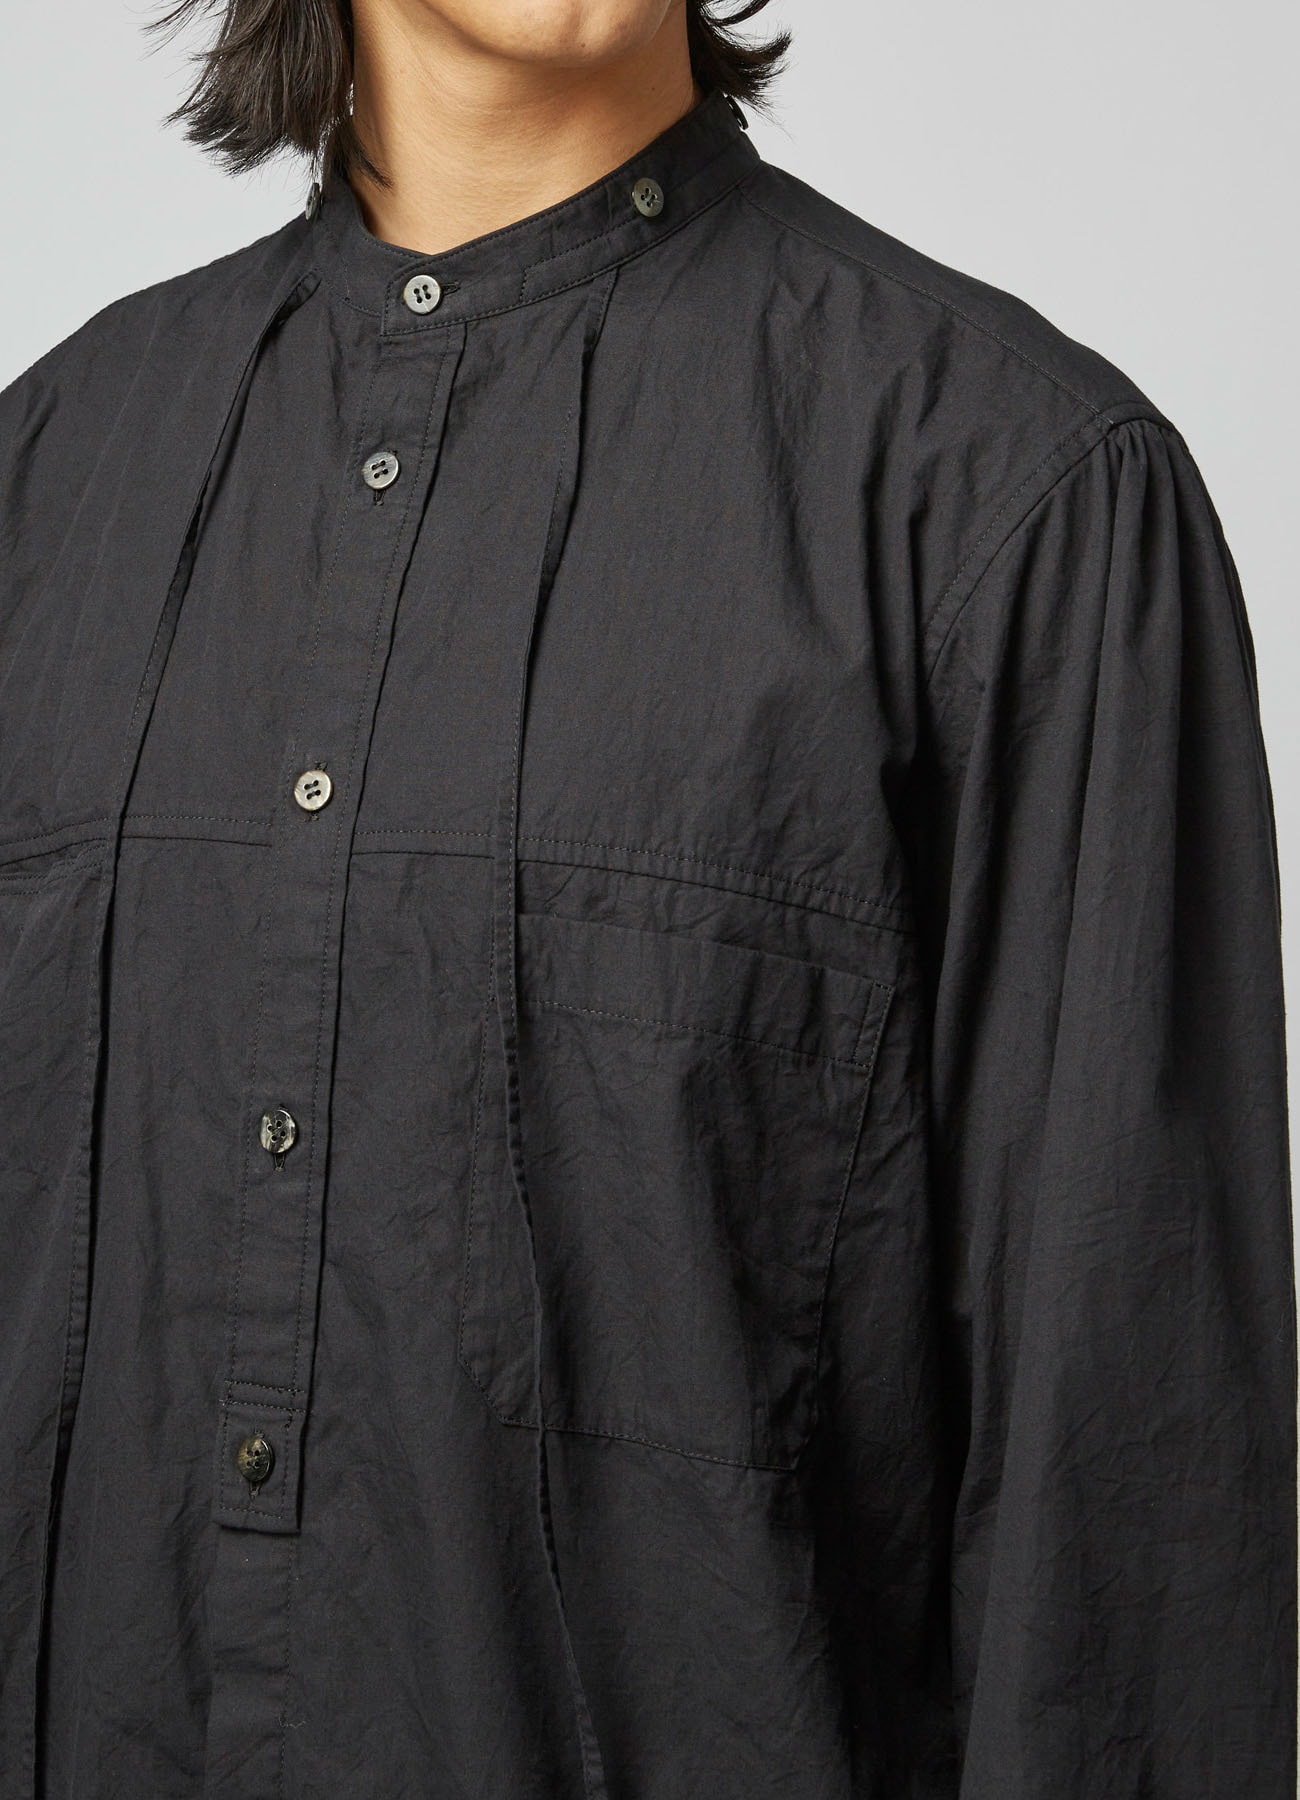 WRINKLED COTTON BROADCLOTH SHIRT WITH COLLAR CORD DETAIL